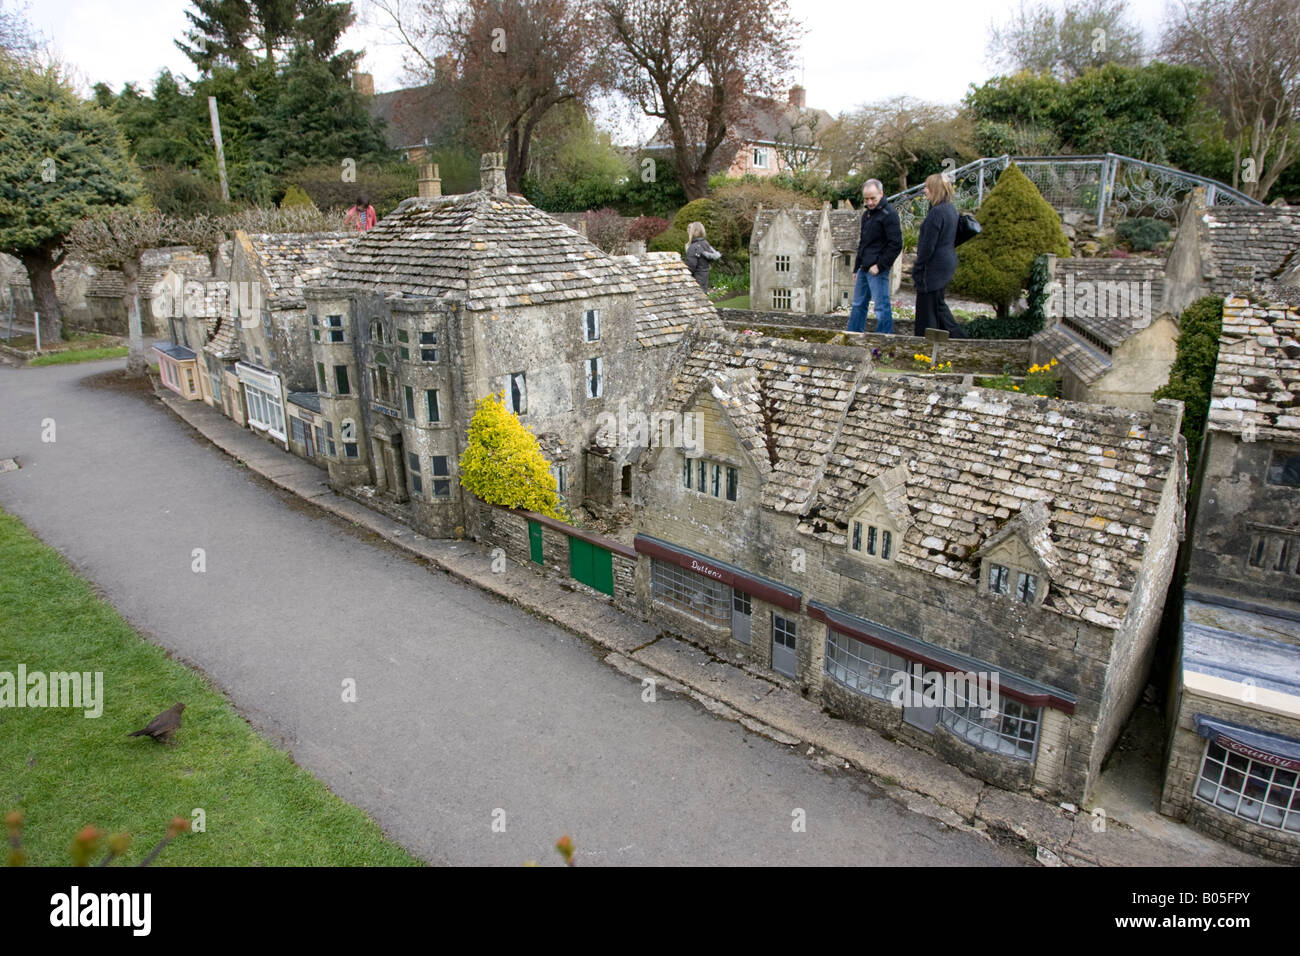 Visitors admiring miniature Cotswold houses model village Bourton on the Water UK Stock Photo